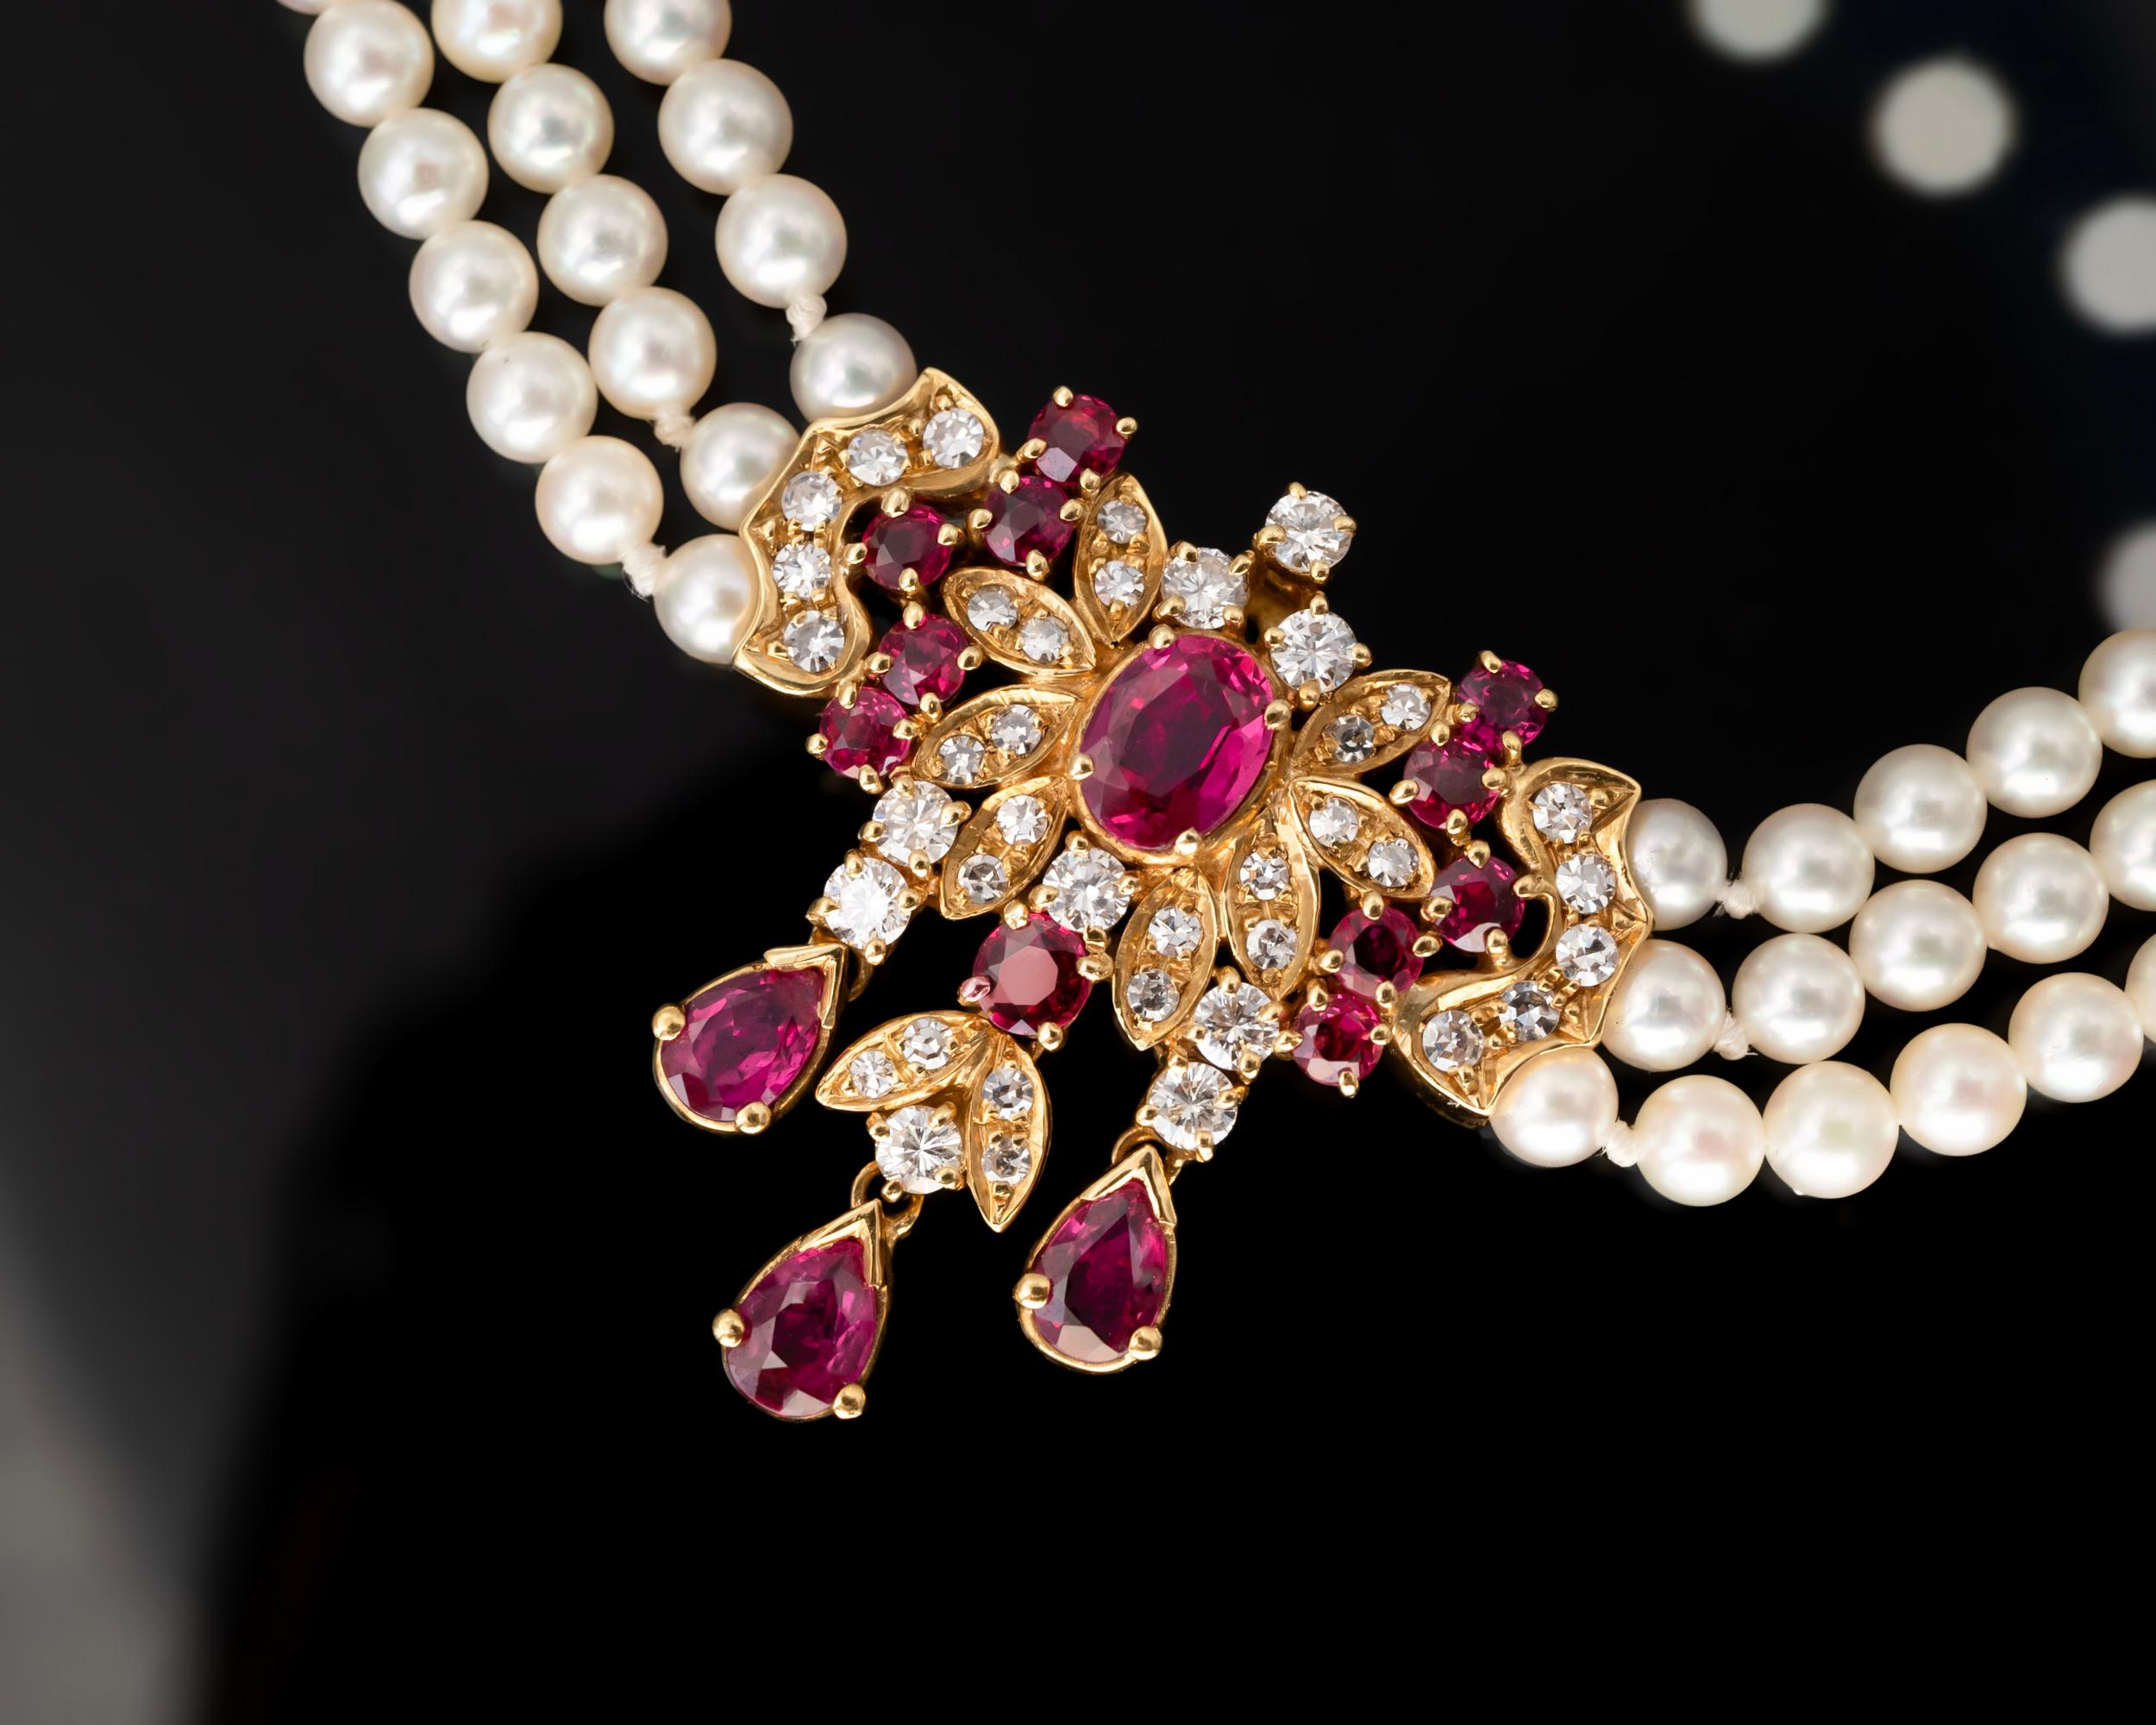 A graceful ruby and diamond Necklace and bracelet set consisting each of a very well made 18 Karat gold element set with lively rubies and diamonds on three stands of white pearls.
Both the quality of the gemstones and the make are